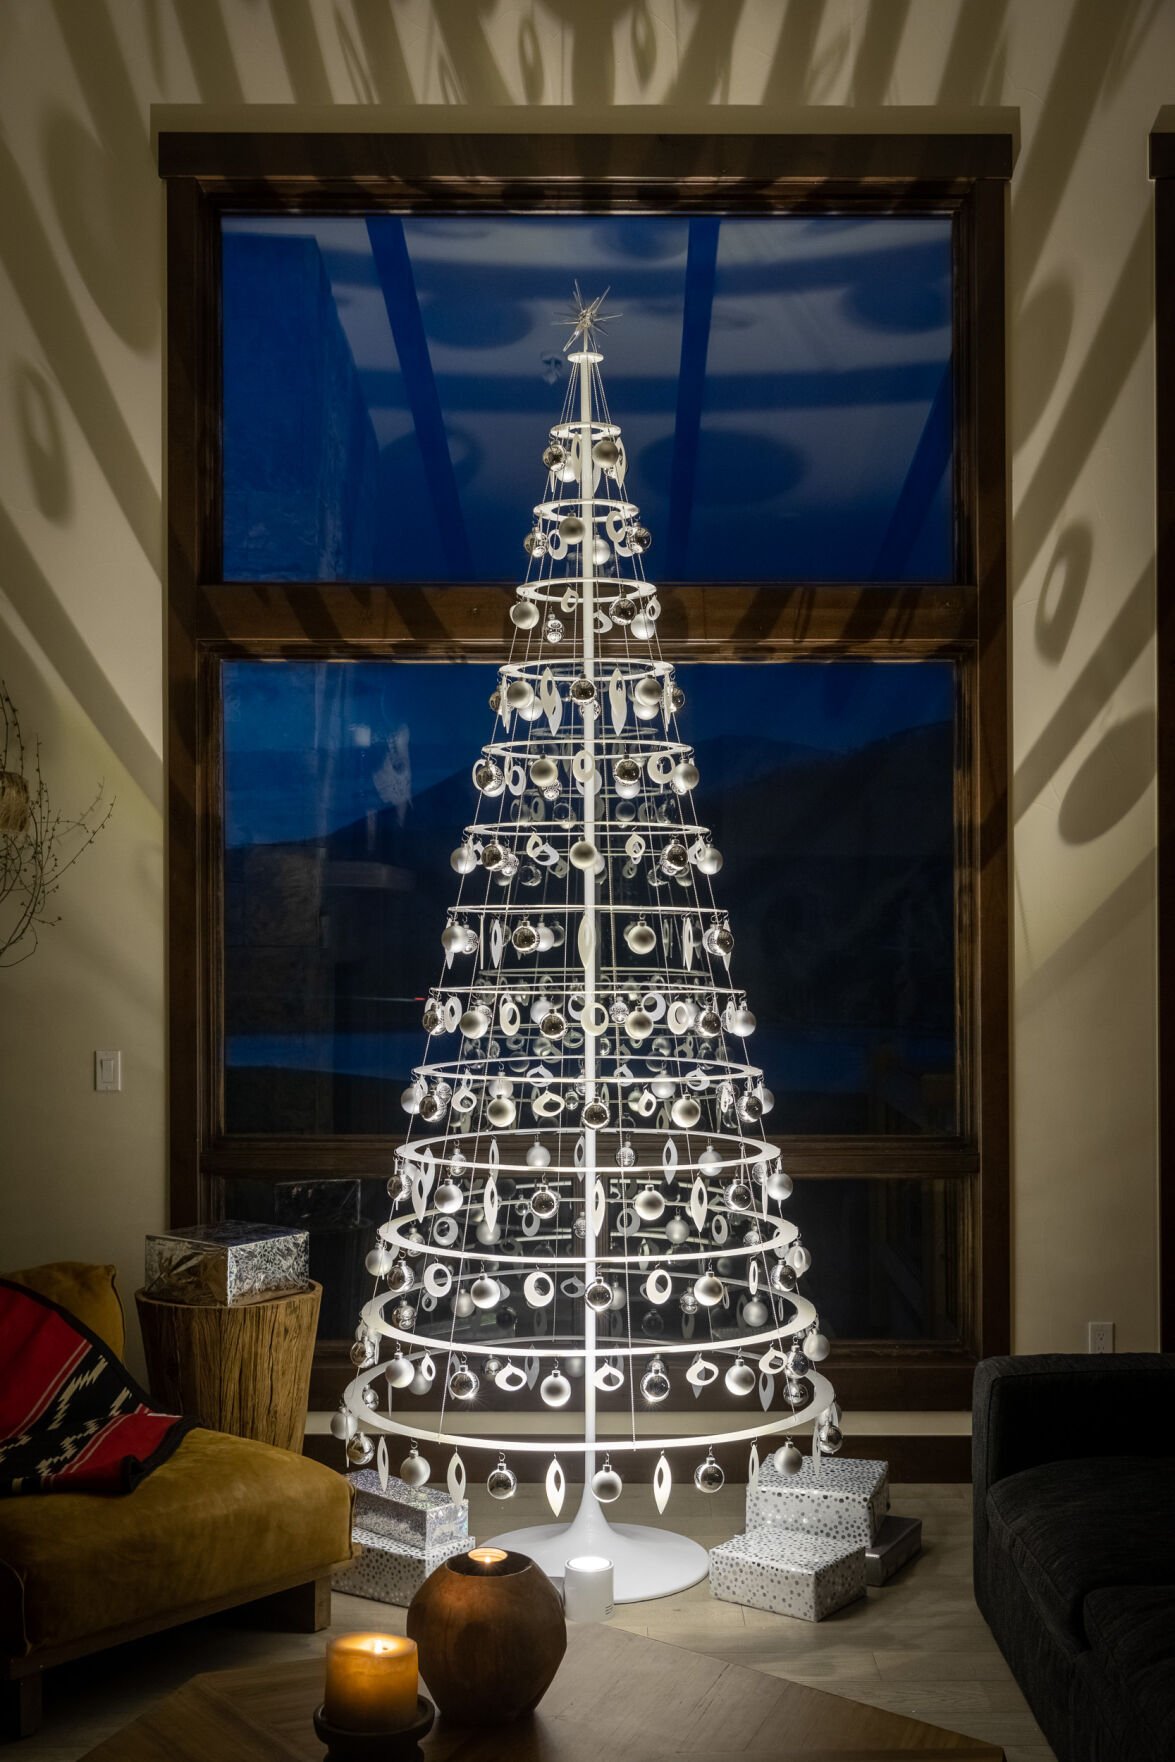 Colorado man makes futuristic, minimalist Christmas trees inspired by grandfather's 60's design